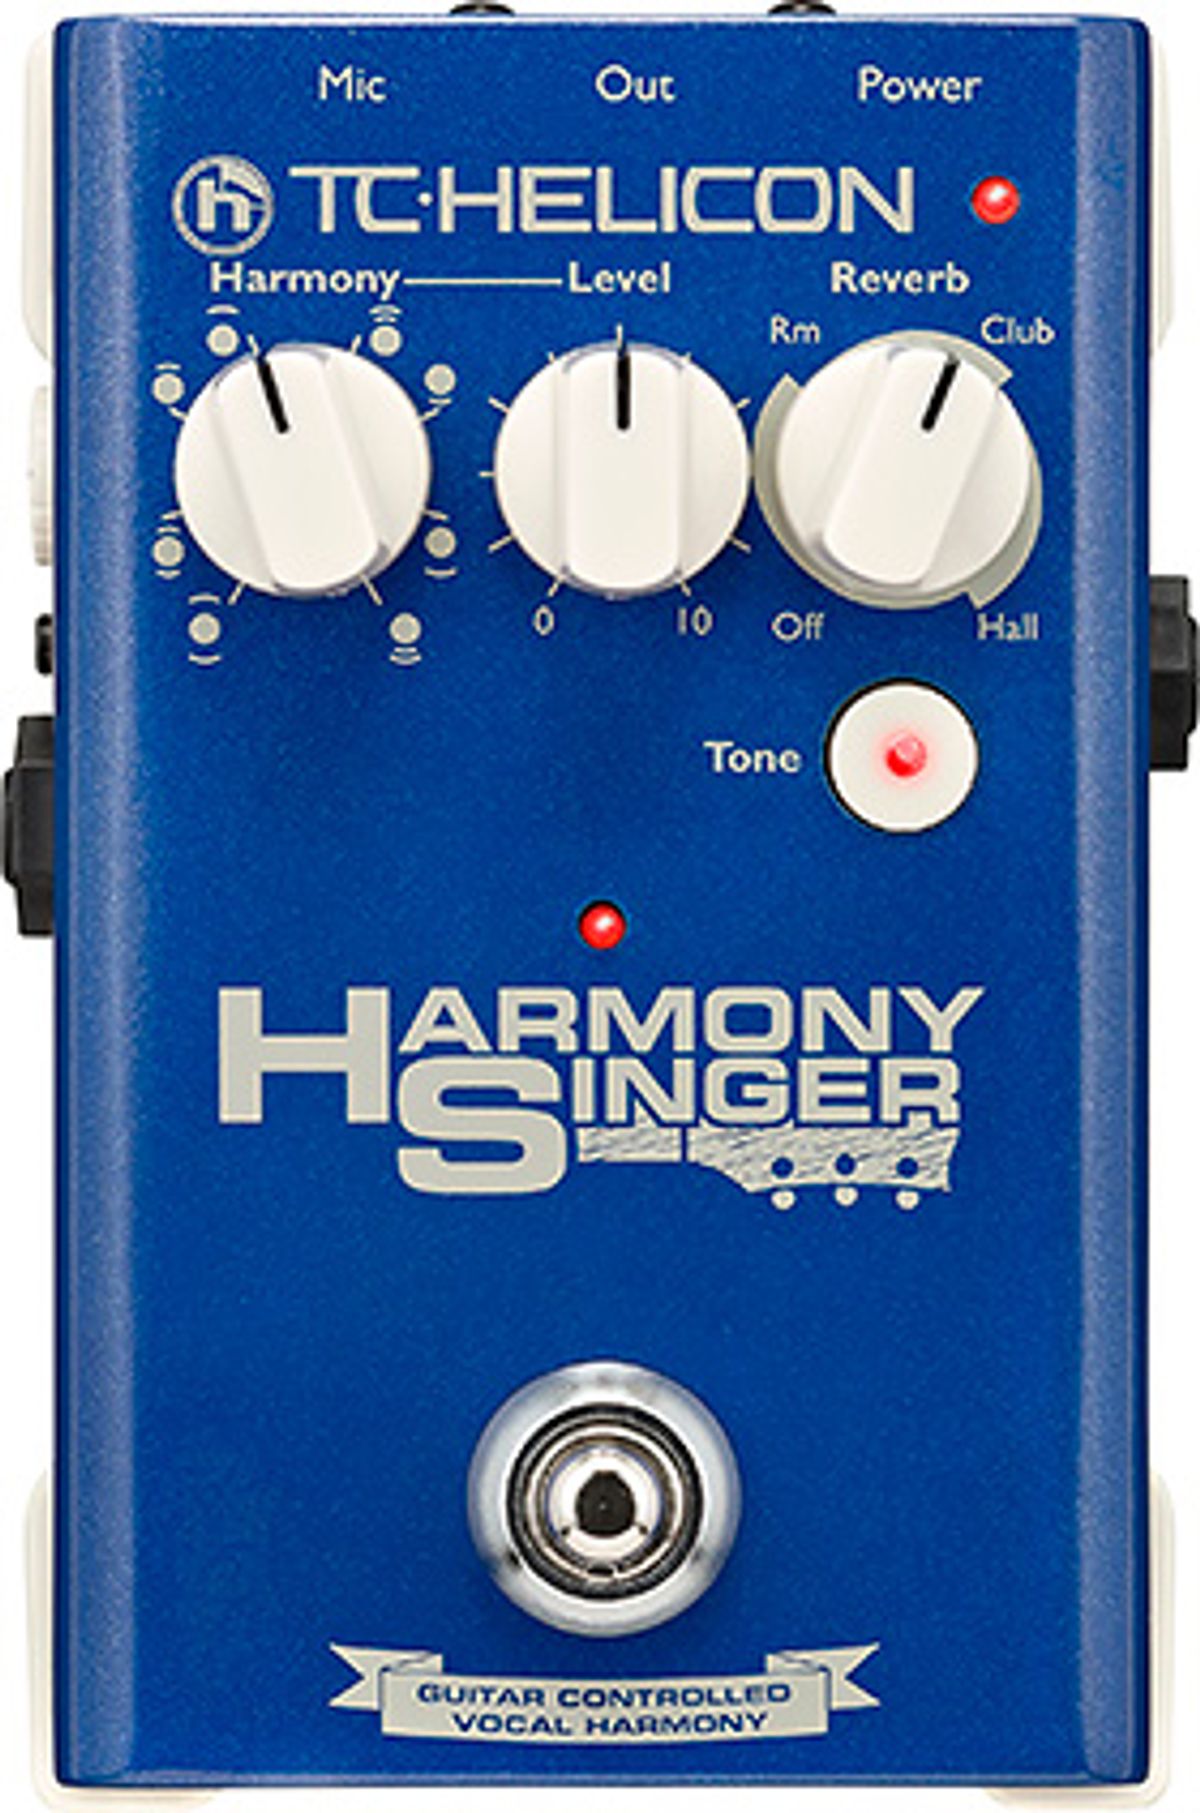 TC-Helicon Releases Harmony Singer Pedal